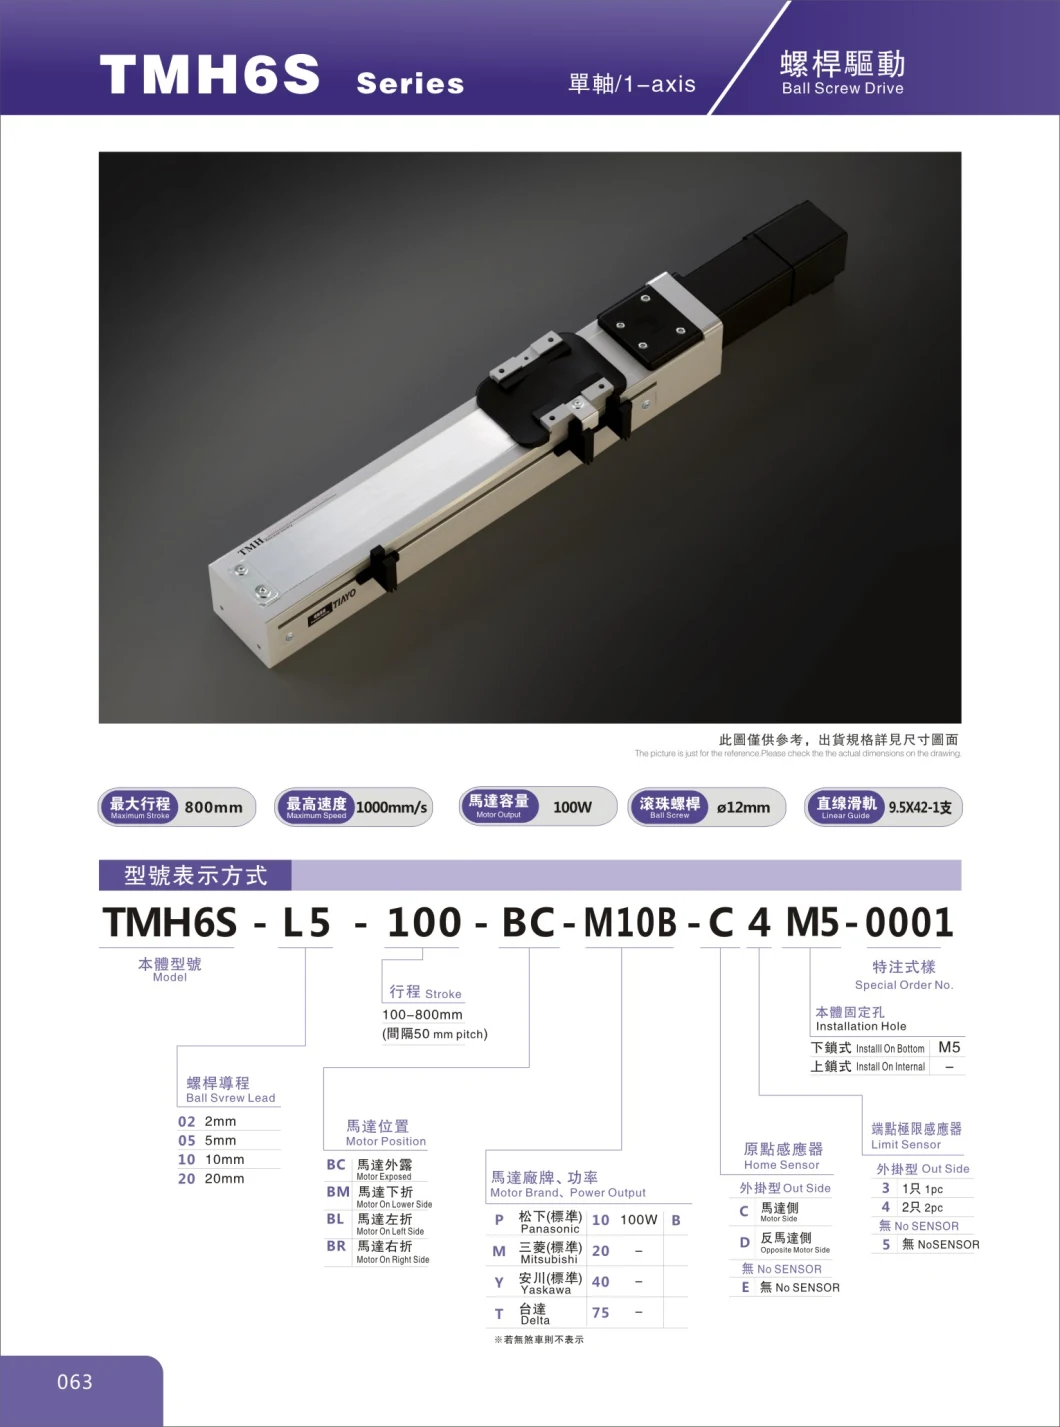 Smooth Motion Semi Enclosed Ball Screw Linear Linear Stage